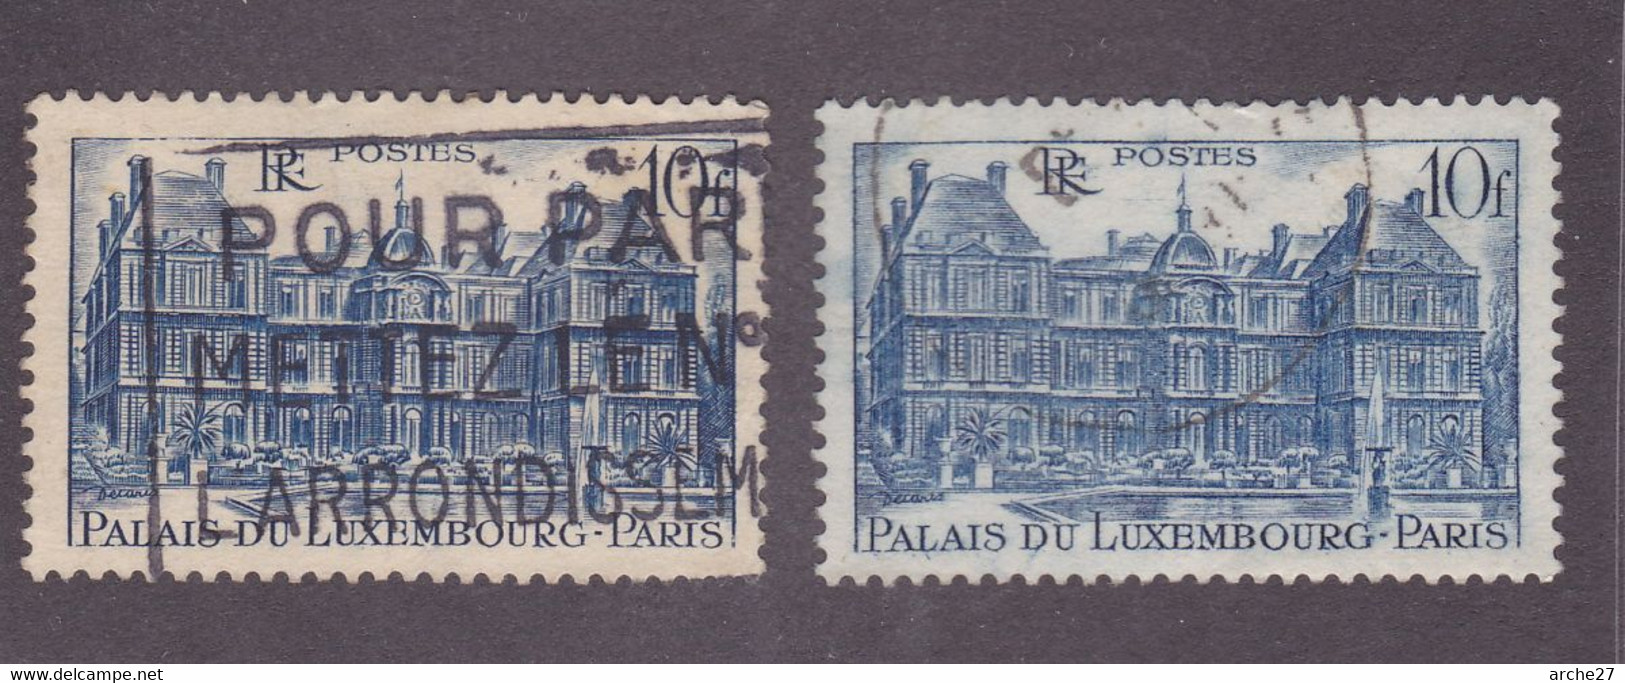 TIMBRE FRANCE N° 760 OBLITERE - Gebraucht